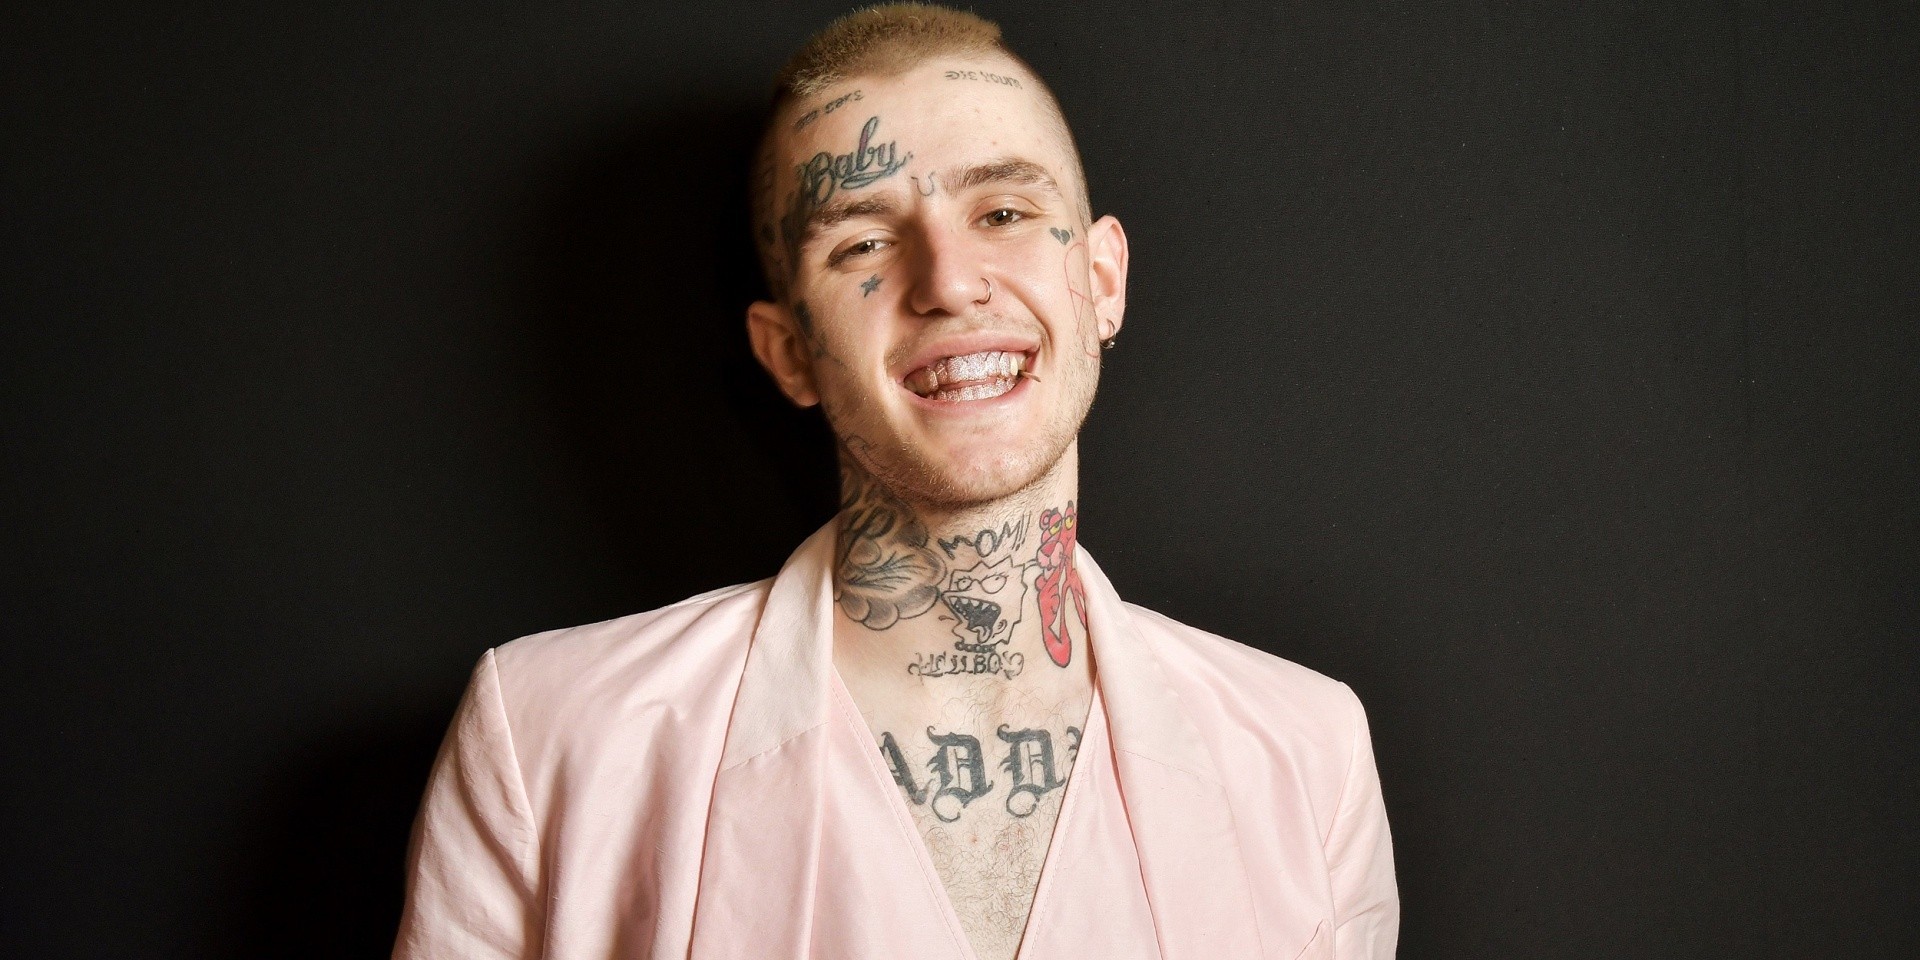 Lil Peep battles his inner demons in new music video for '16 Lines' – watch